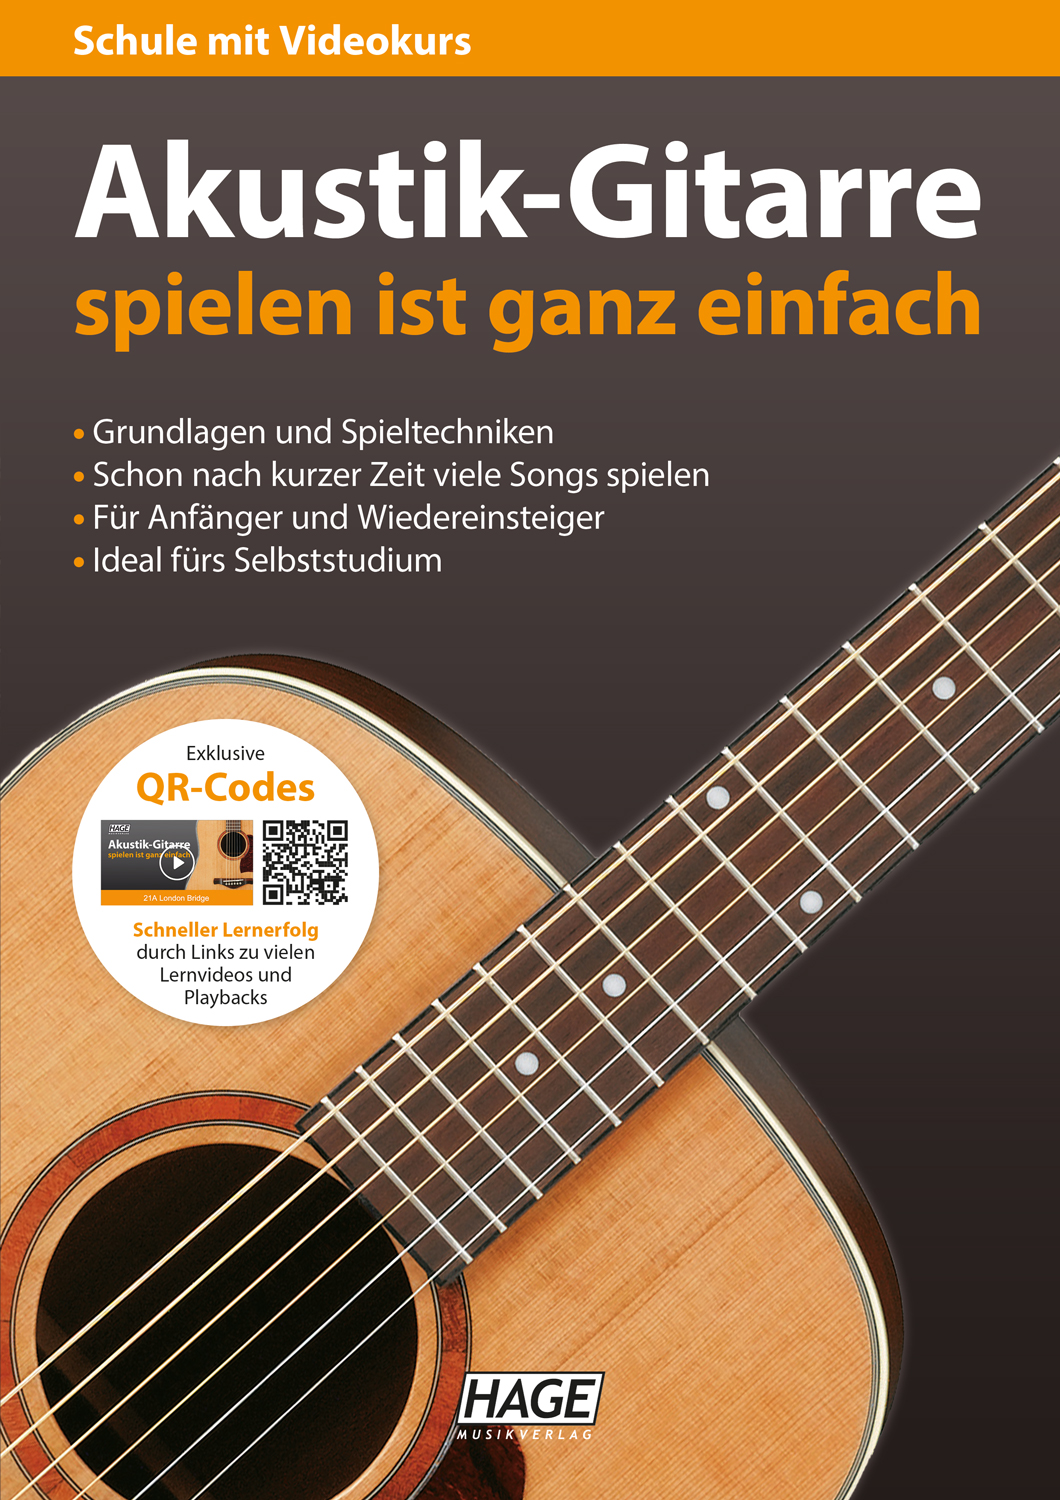 Playing acoustic guitar is very easy (with QR codes)